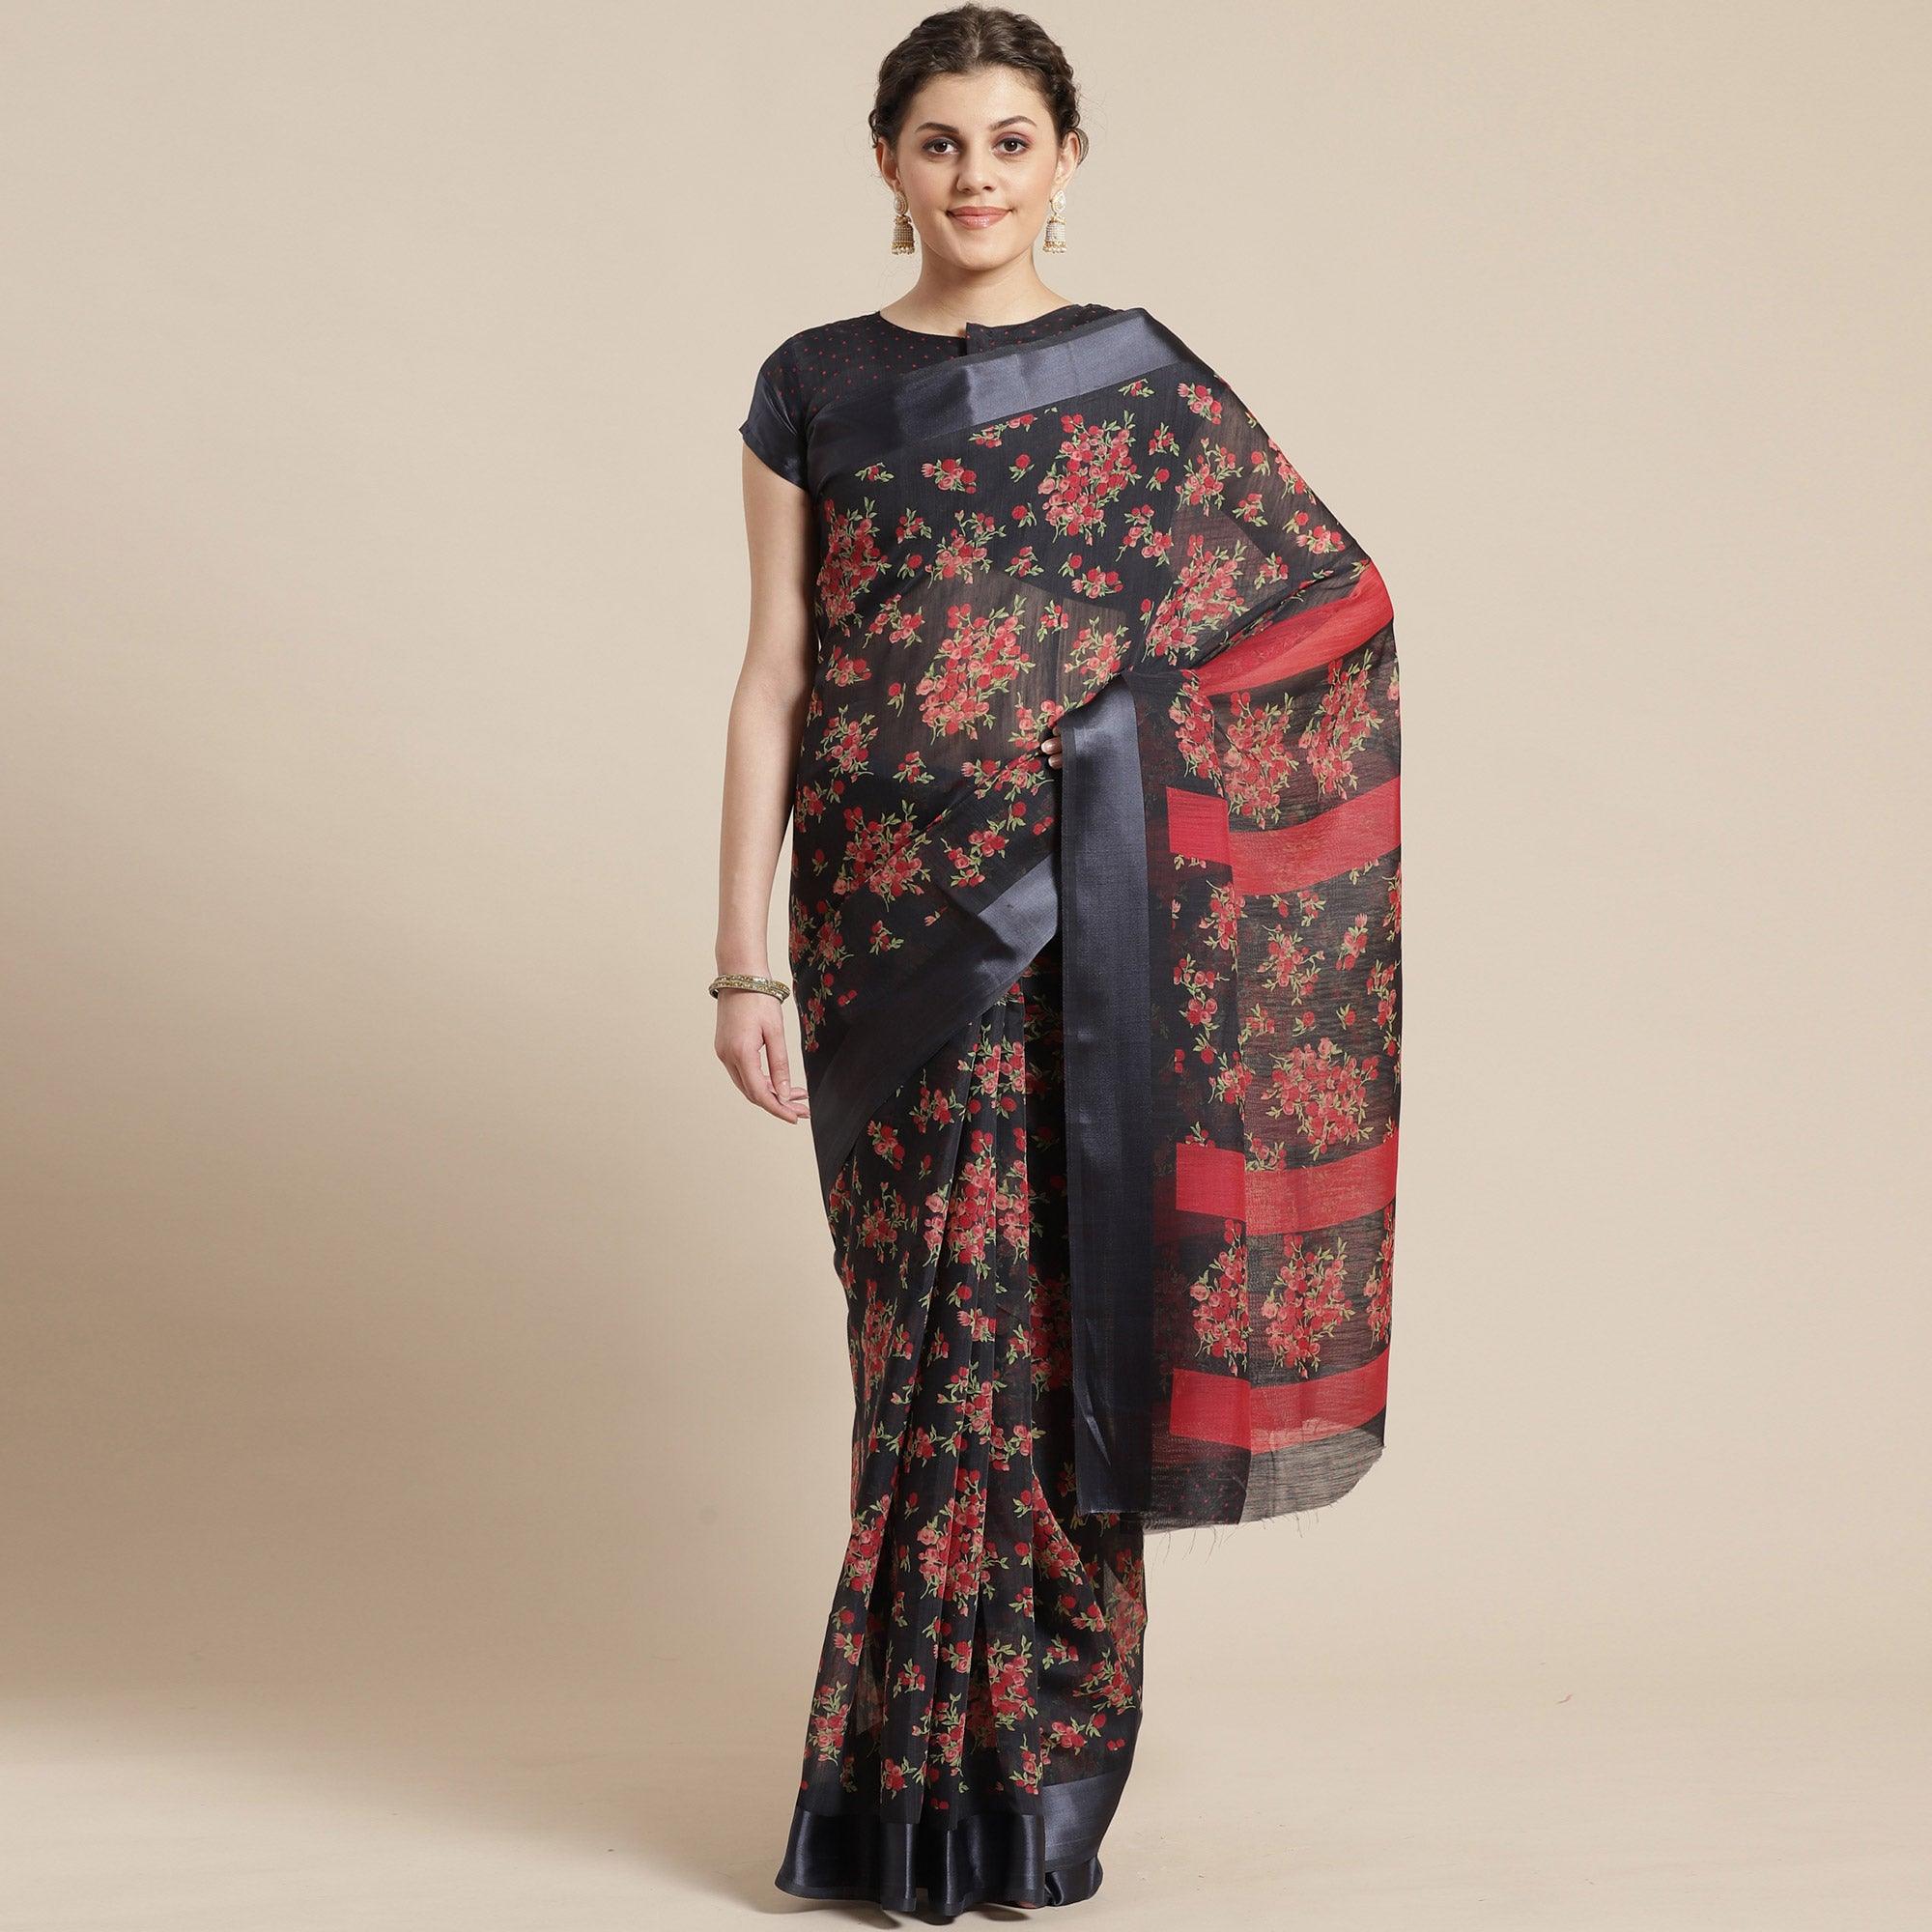 Engrossing Black Colored Casual Wear Floral Printed Cotton Silk Saree - Peachmode